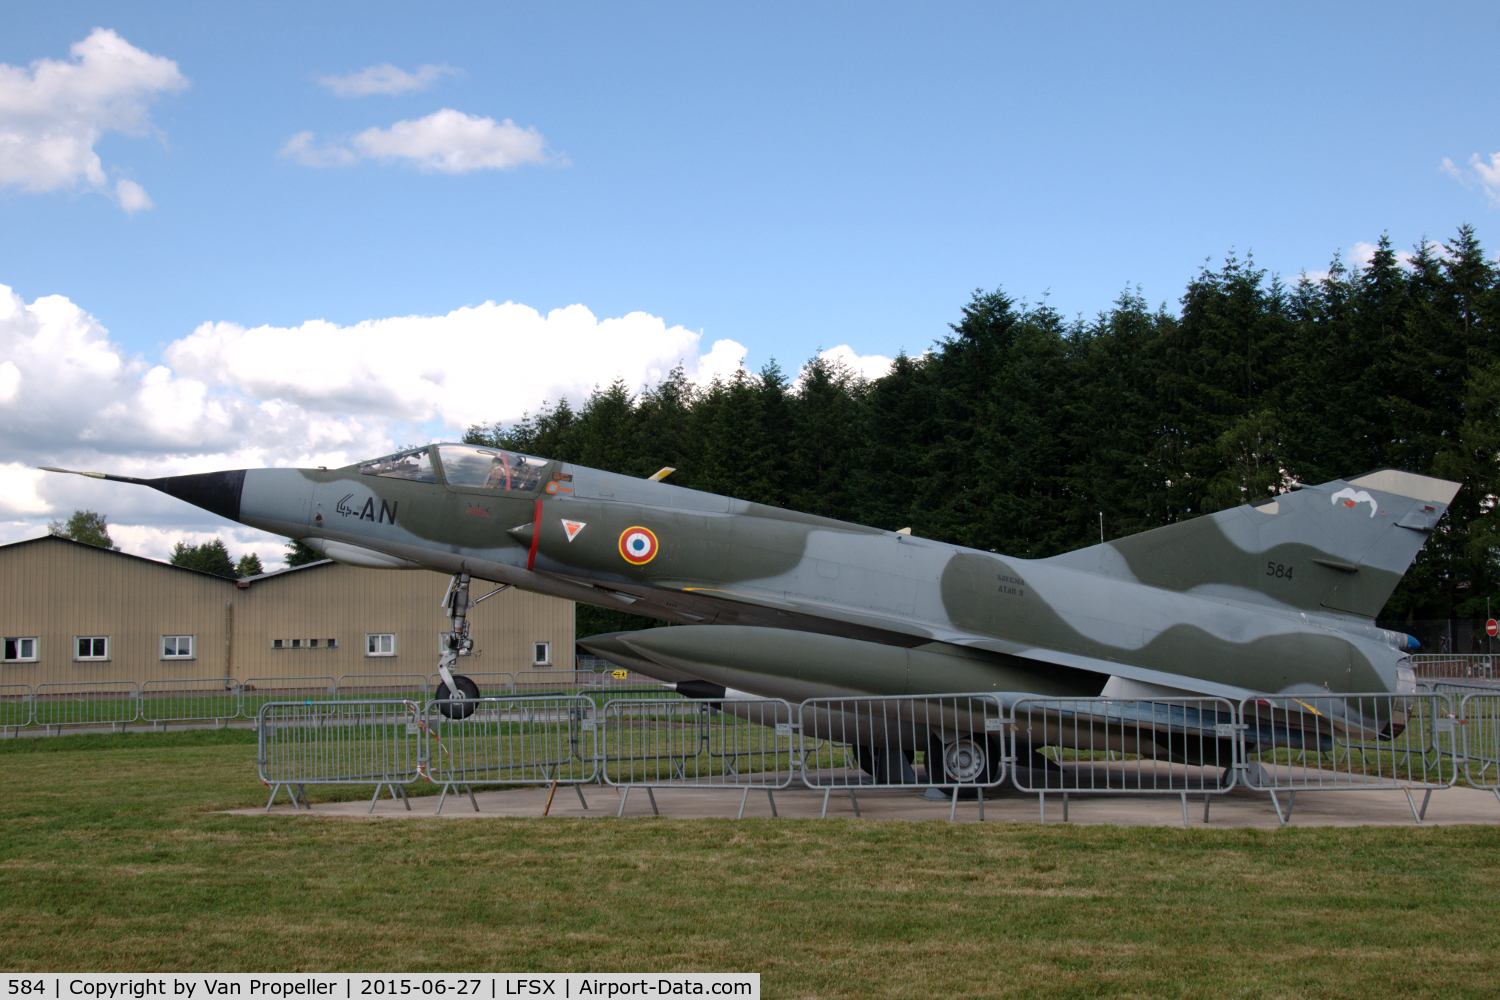 584, Dassault Mirage IIIE C/N 584, Dassault Mirage IIIE preserved nose-up at Luxeuil Air Base, France